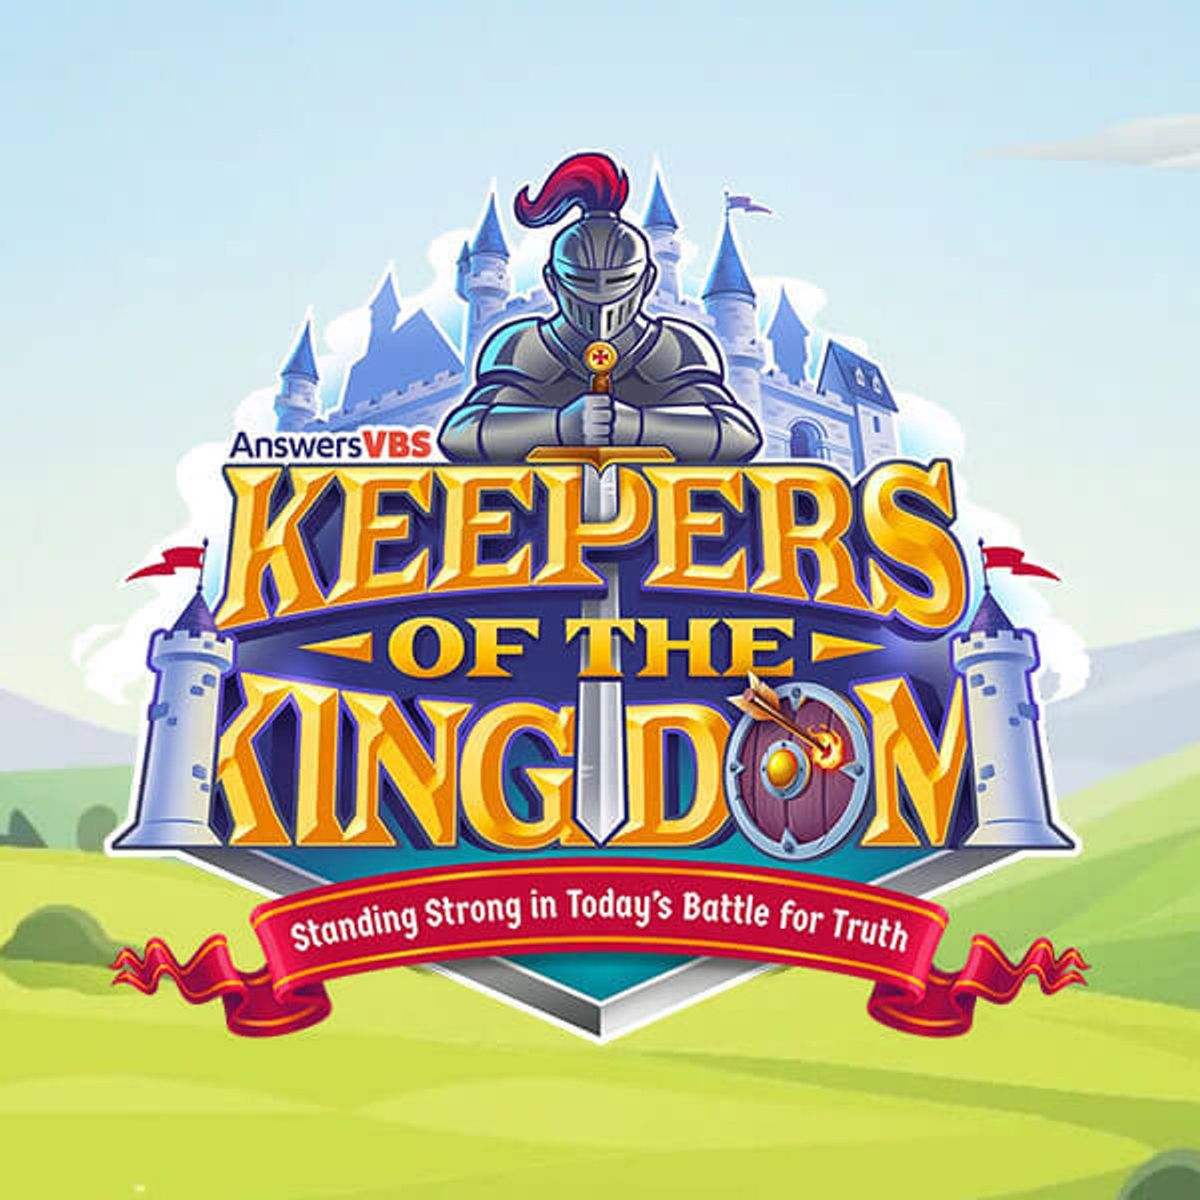 All-Ages VBS Keepers of The Kingdom and Prepared with a Reason